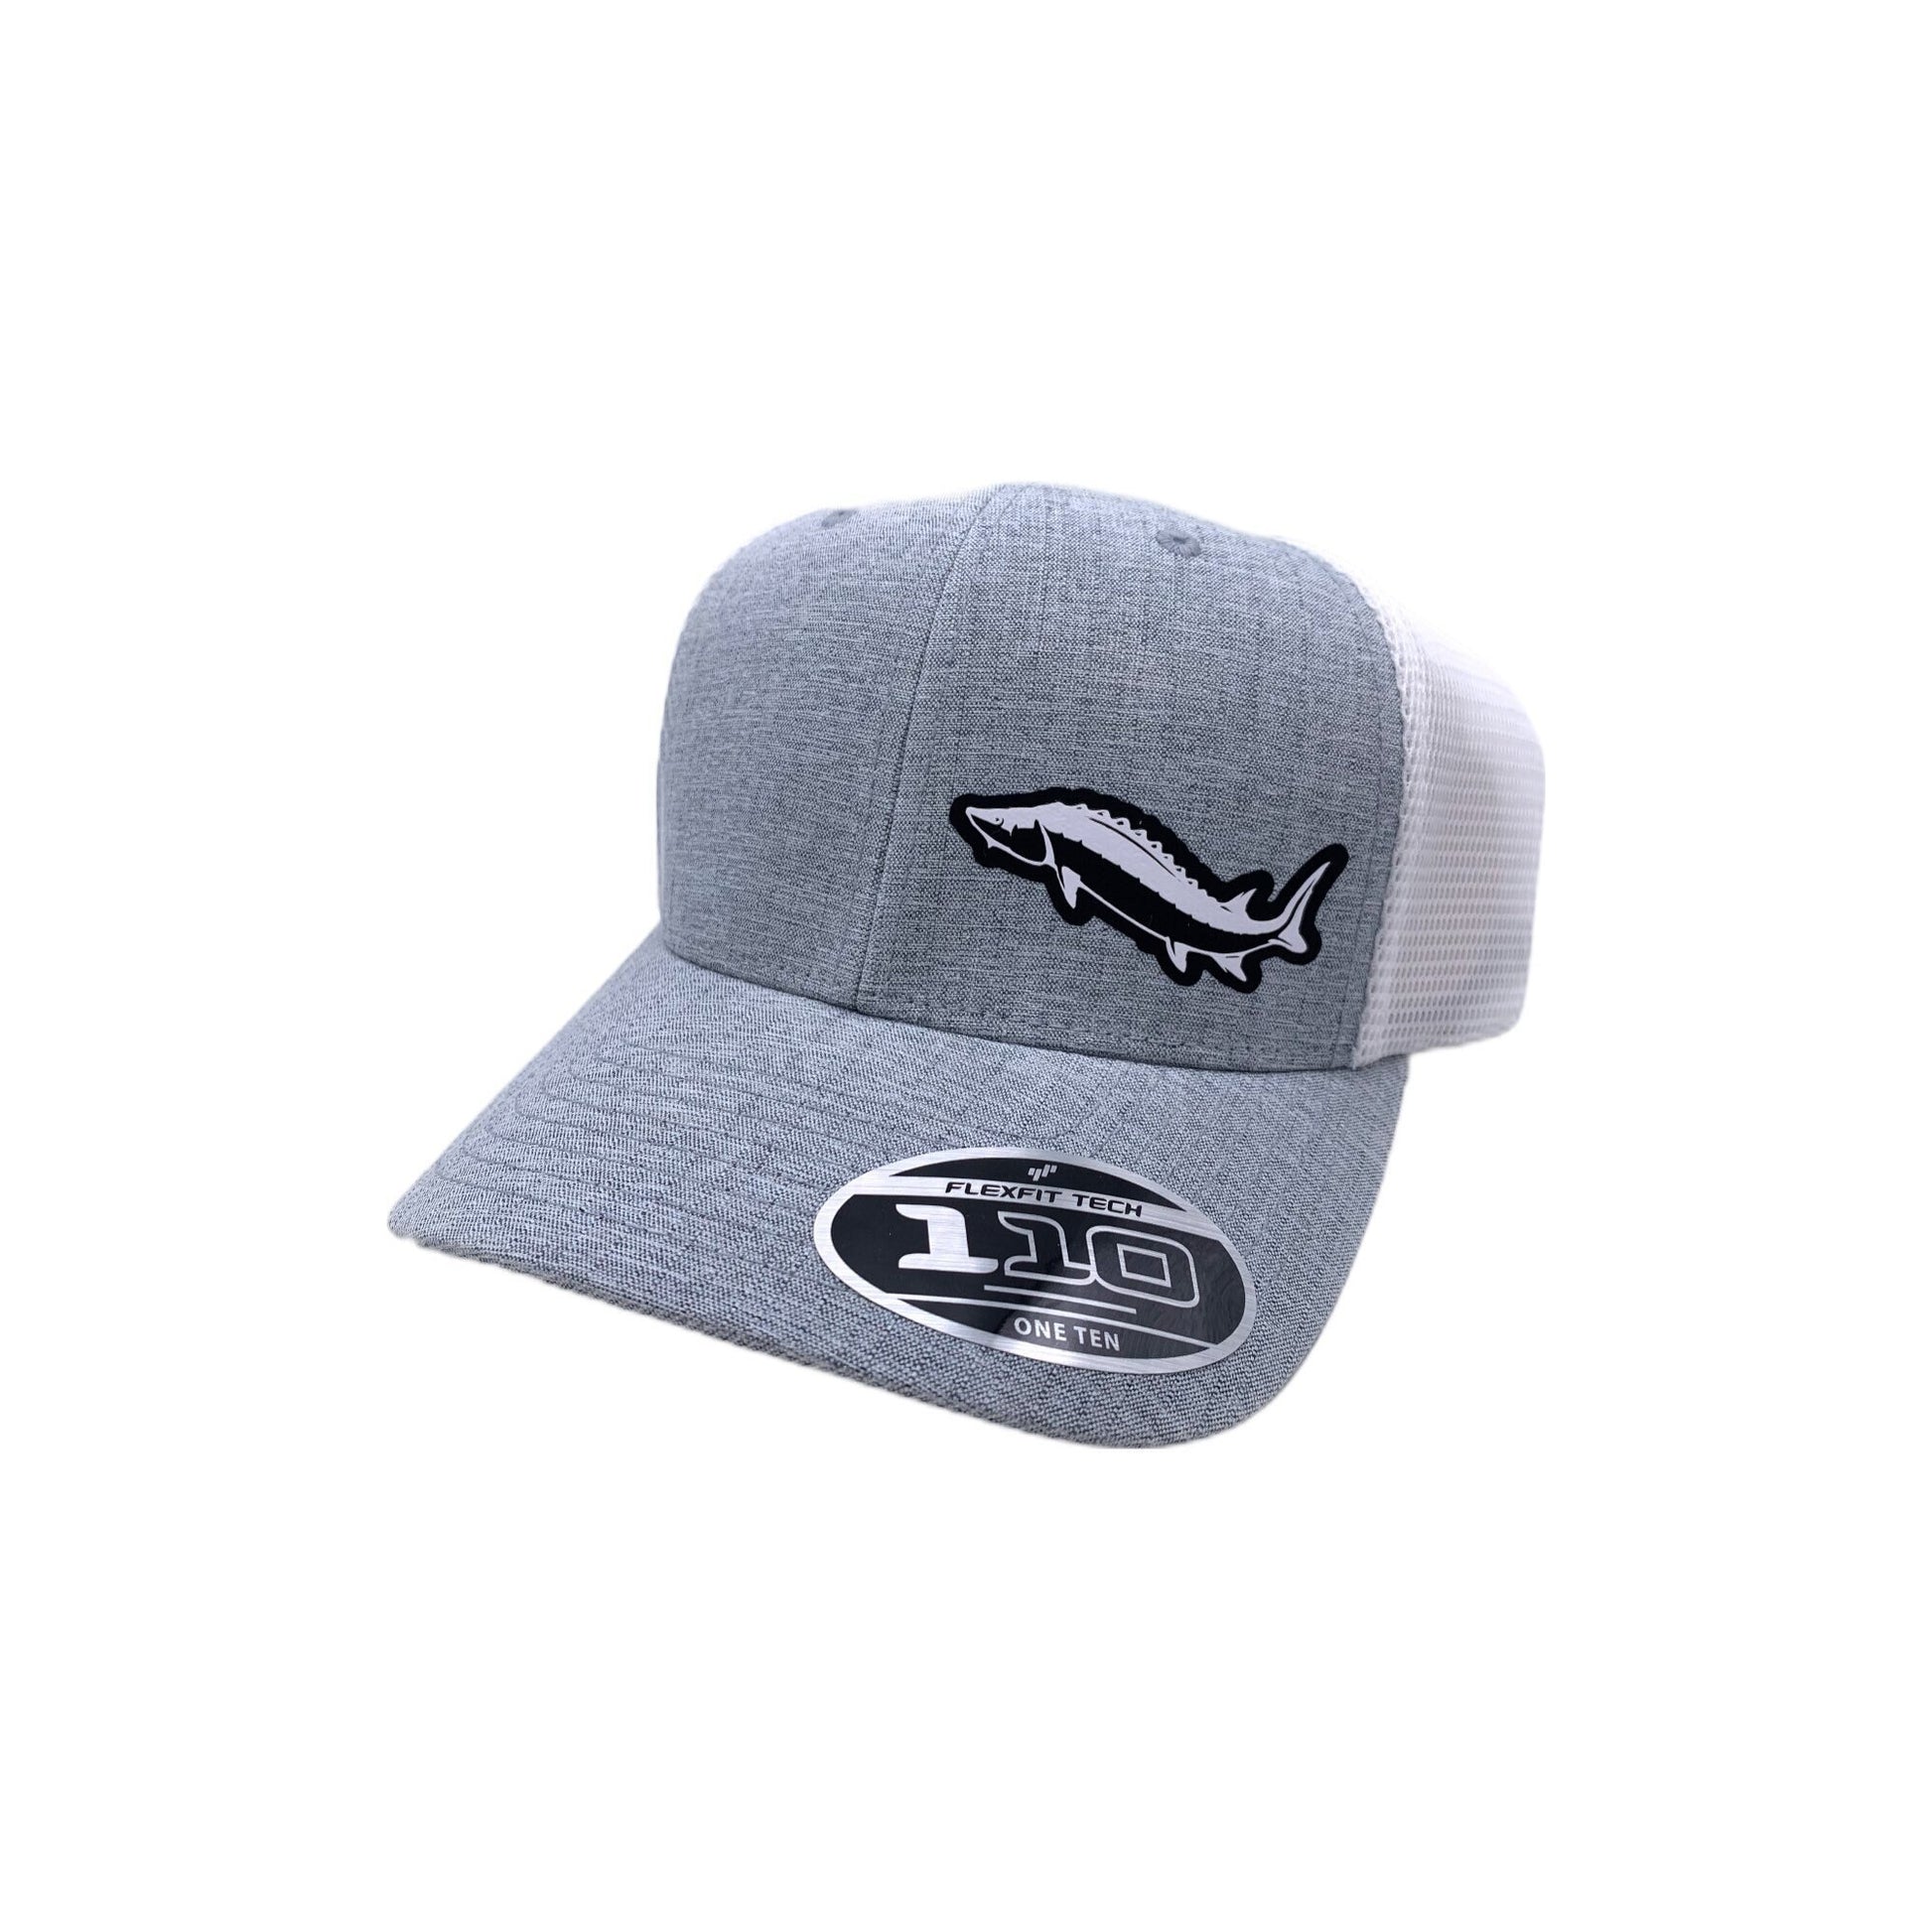 Sturgeon Fishing Snap Back Adjustable Hat with Multiple Hat